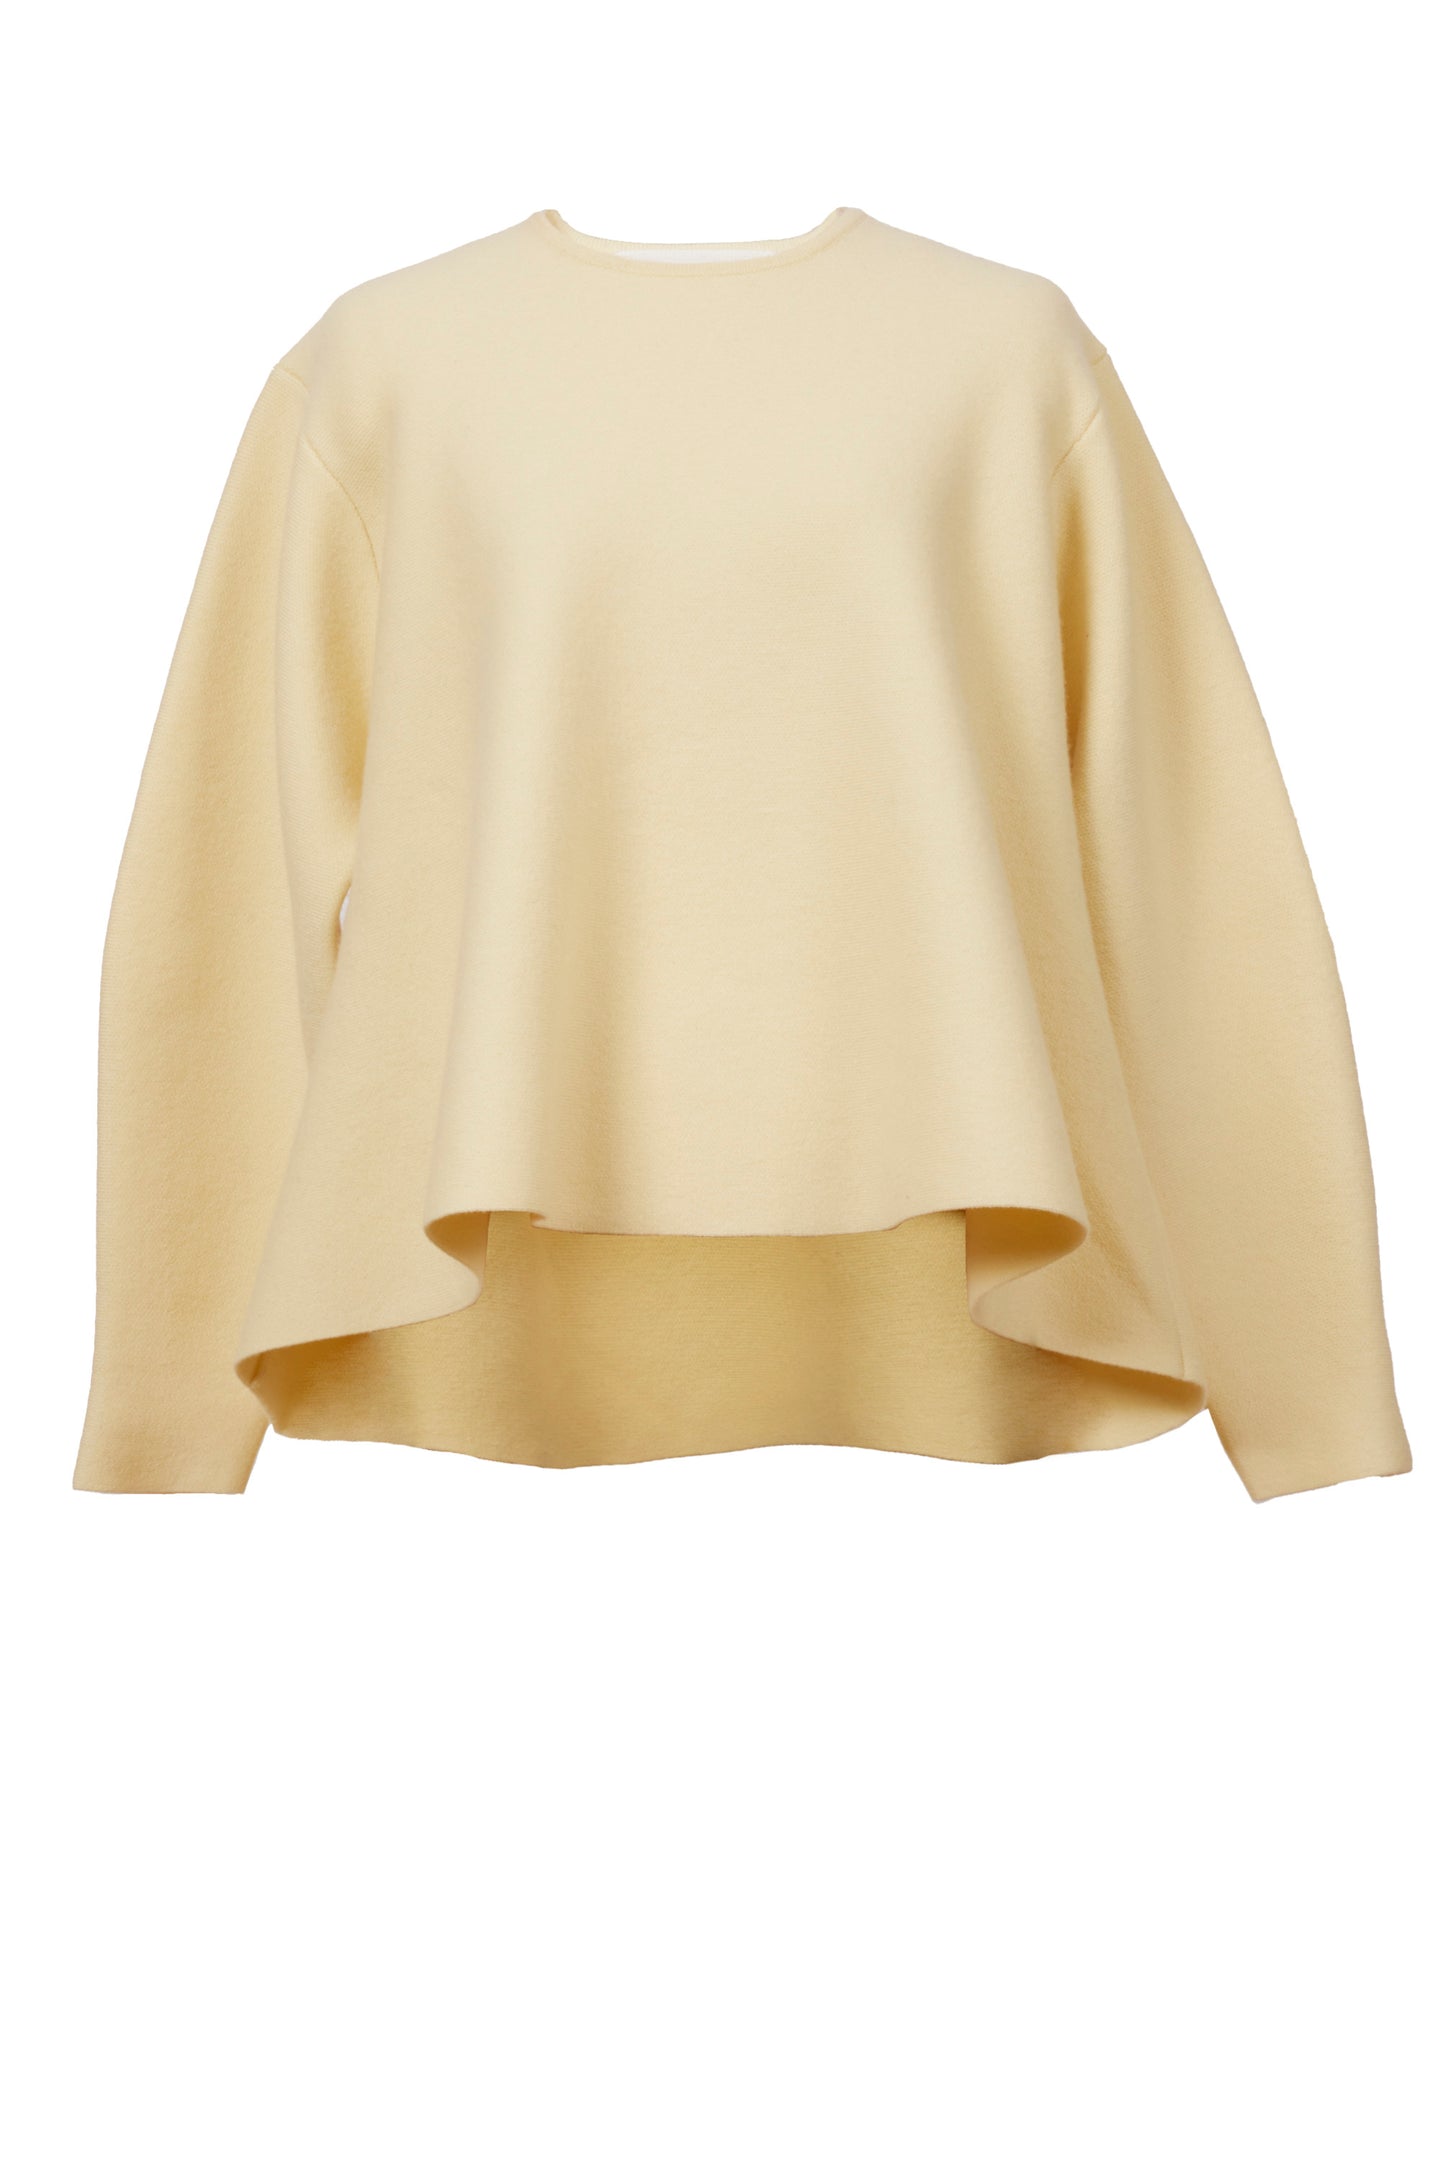 Wool Cashmere Knit Flare Top | Citrine